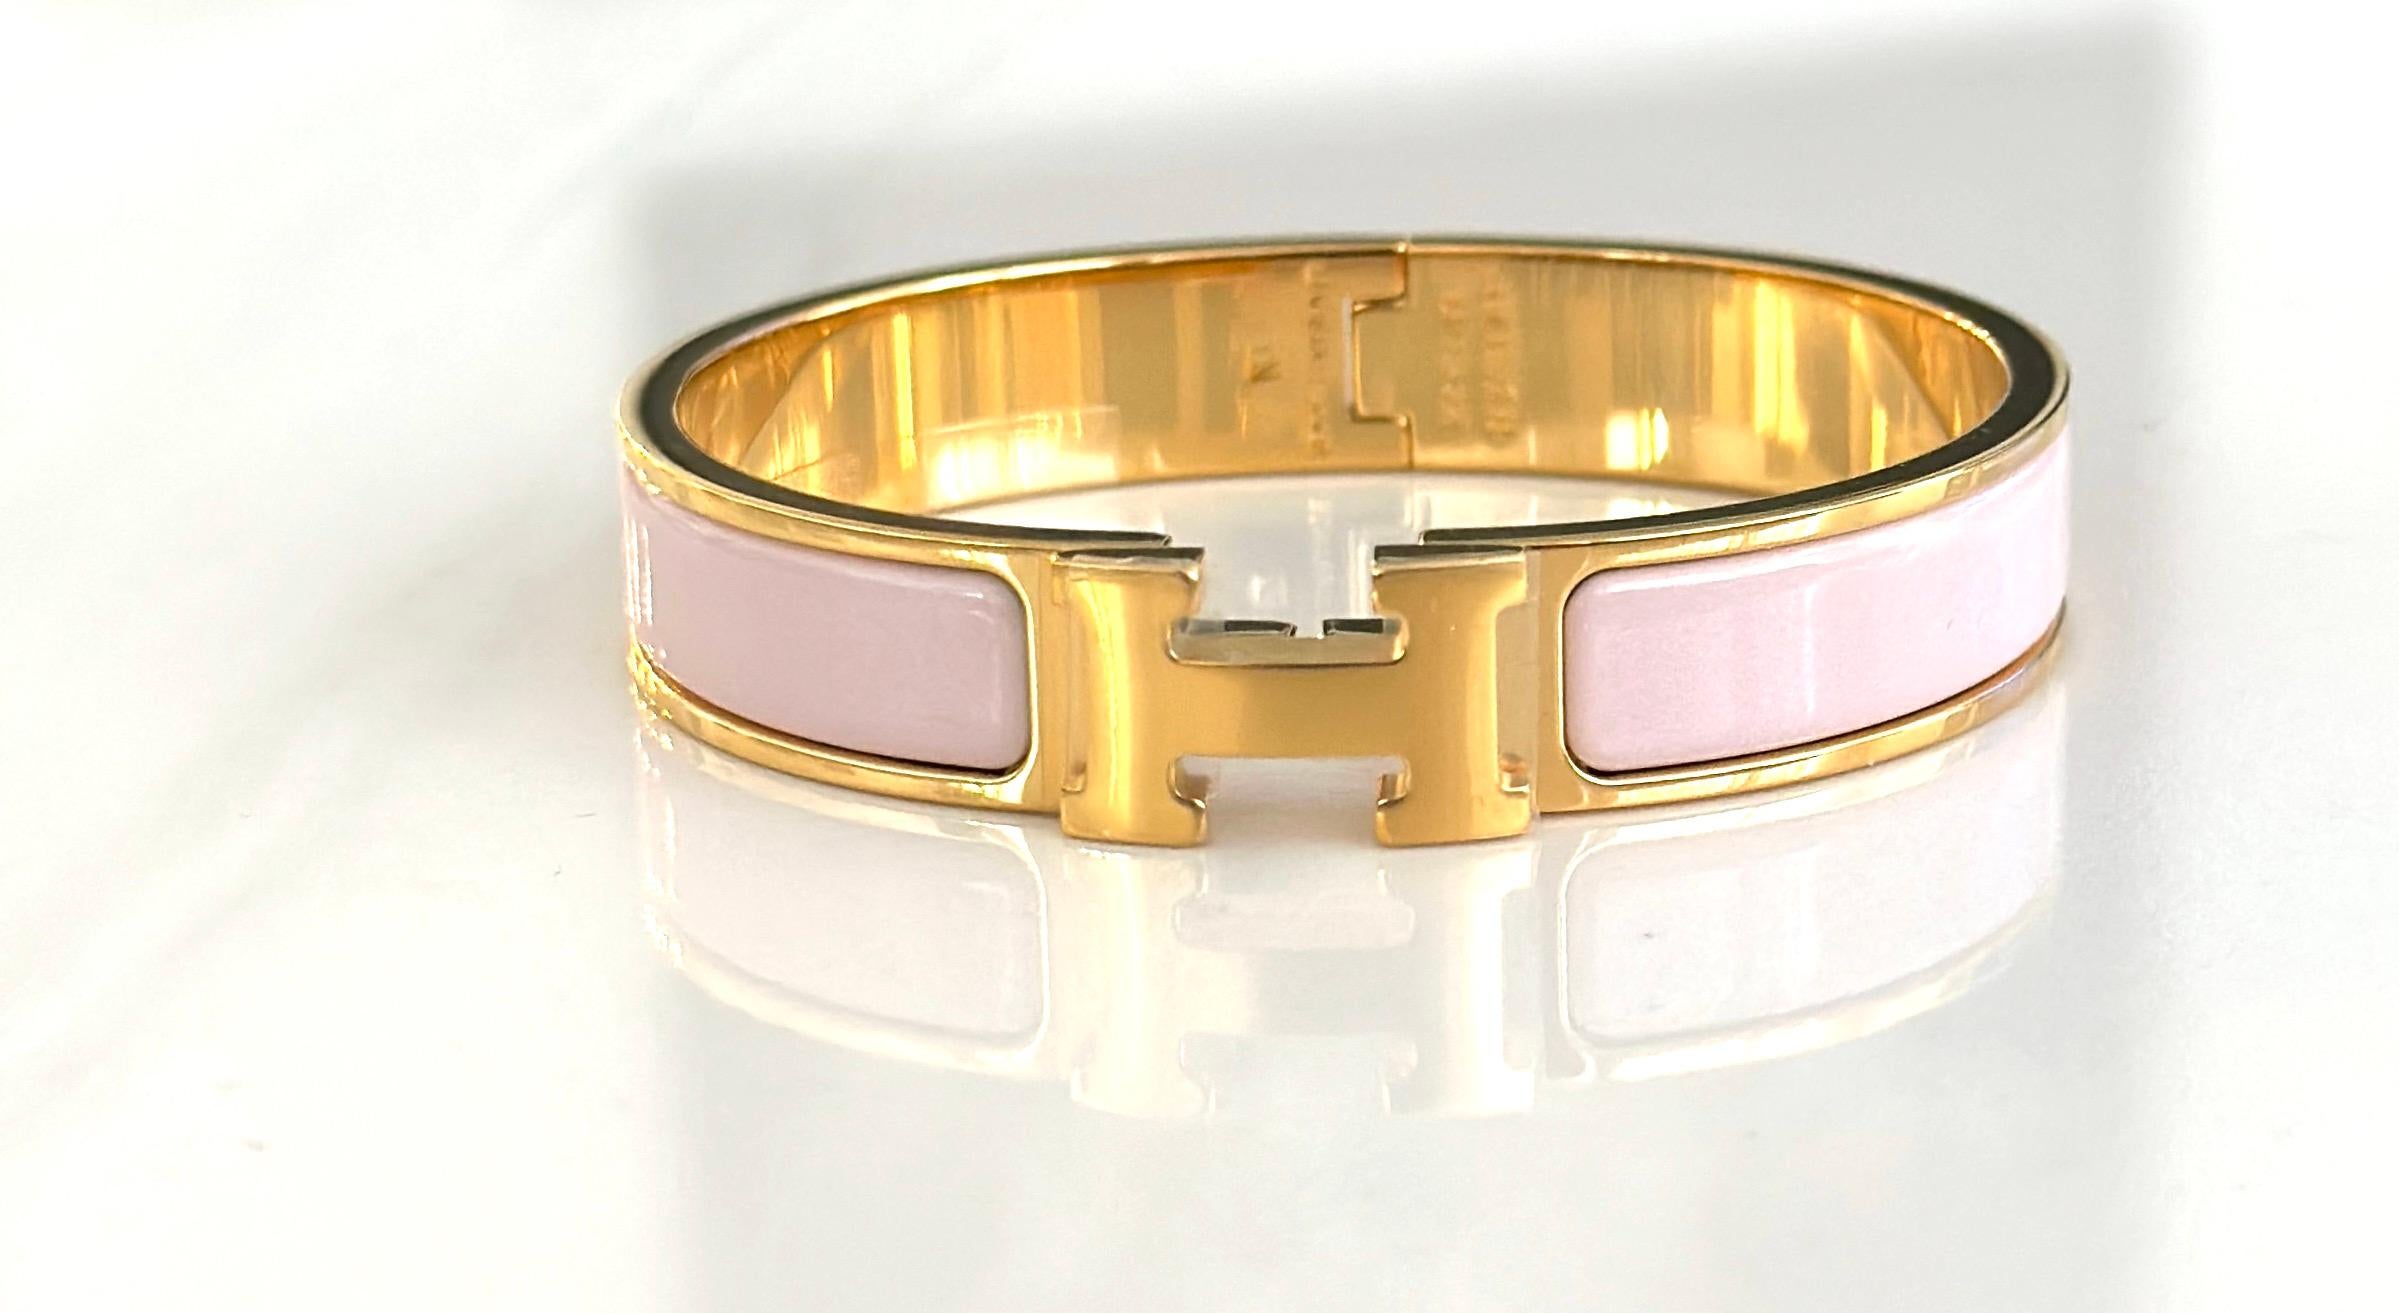 The Clic Clac H GM
GM SIZE IS THE LARGER SIZE
Hermes bracelet in Yellow Gold Plated 
Color is ROSE CANDEUR
Pink
GM size, for the larger hand 
Circumference: 7.5